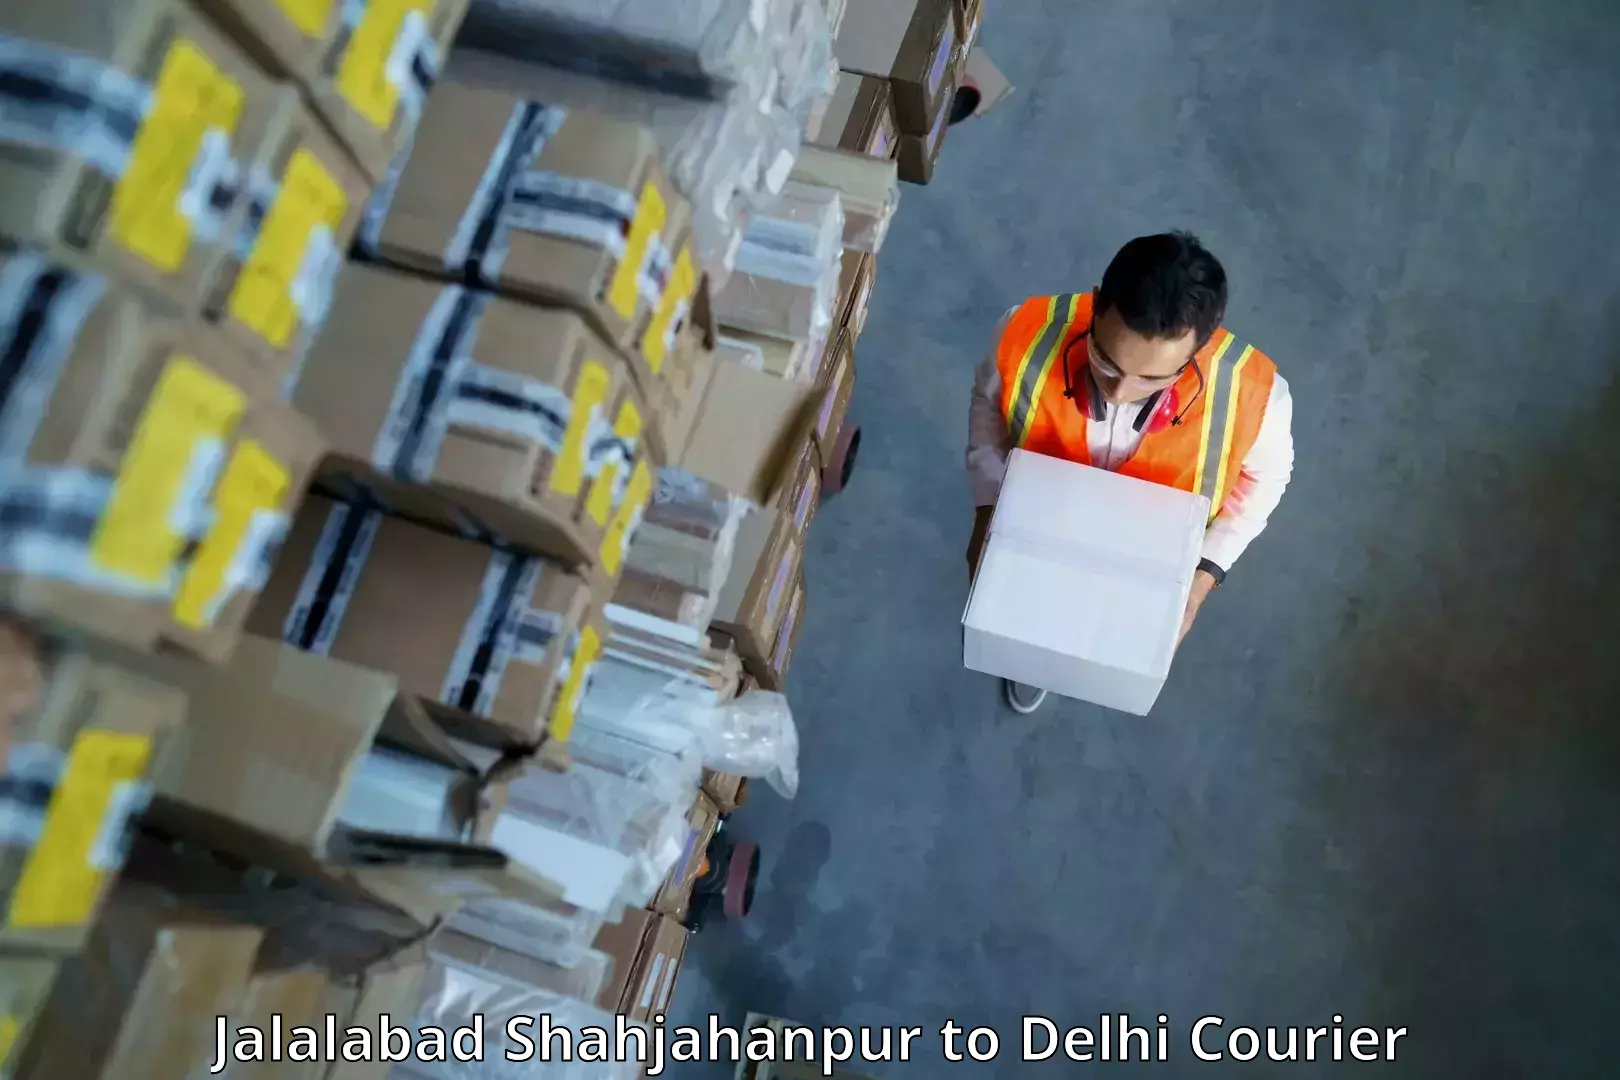 On-call courier service Jalalabad Shahjahanpur to East Delhi